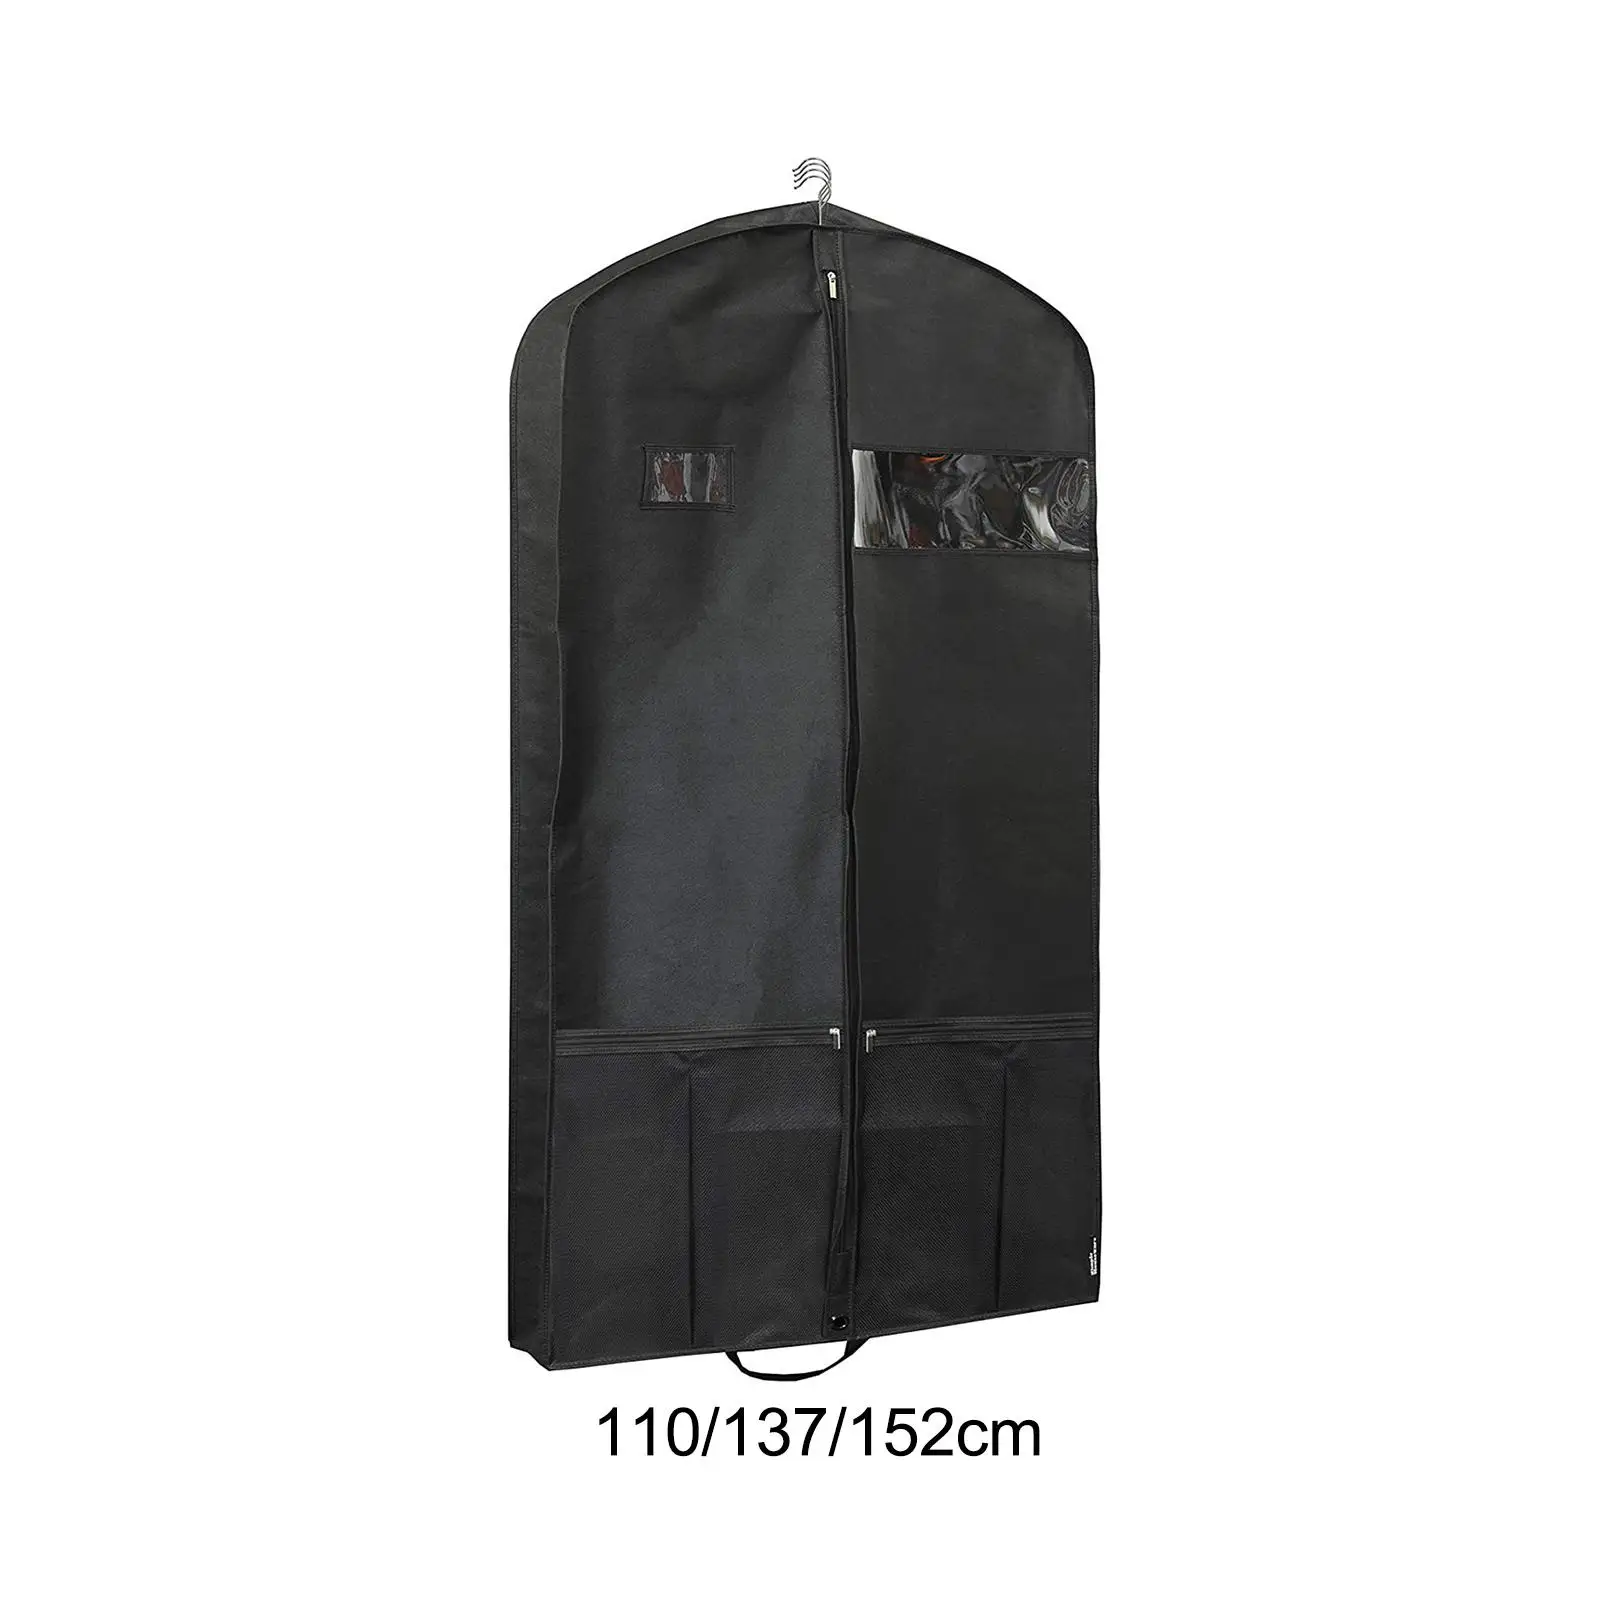 Garment Bag 2 Extra Pocket Coat Covers Non Woven Fabric Thin and Lightweight for Travel Accessories Water Resistance Suit Bag